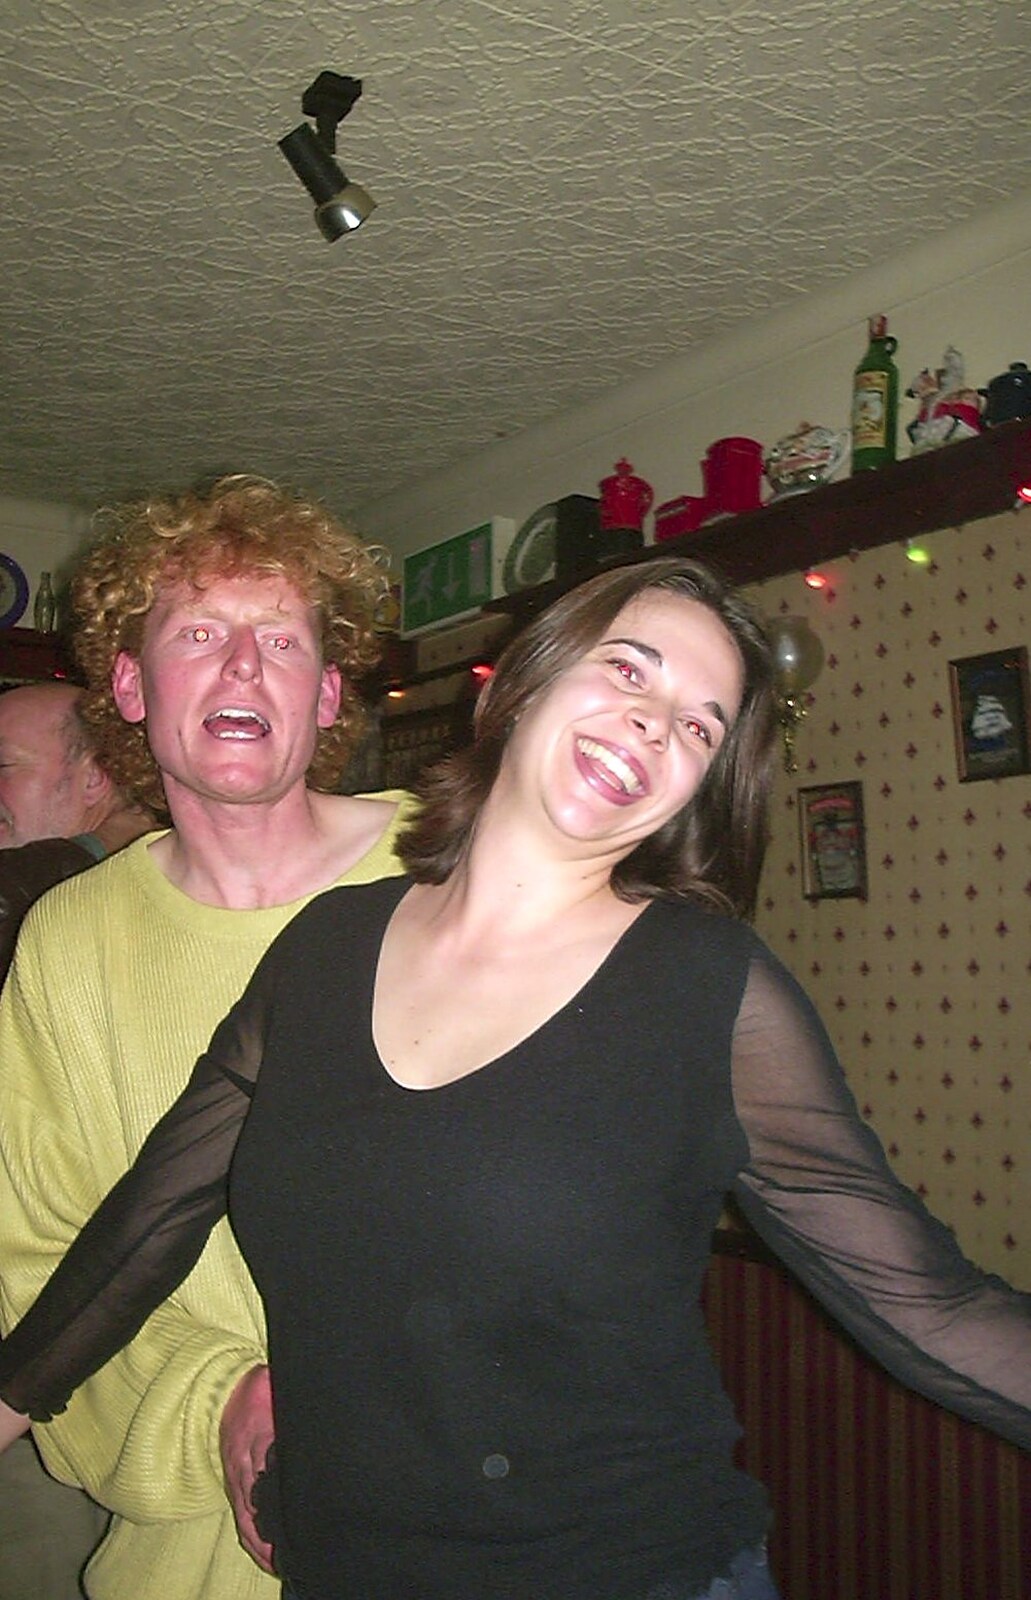 Wavy and Jen from Twenty Years at The Swan Inn, Brome, Suffolk - 15th November 2003